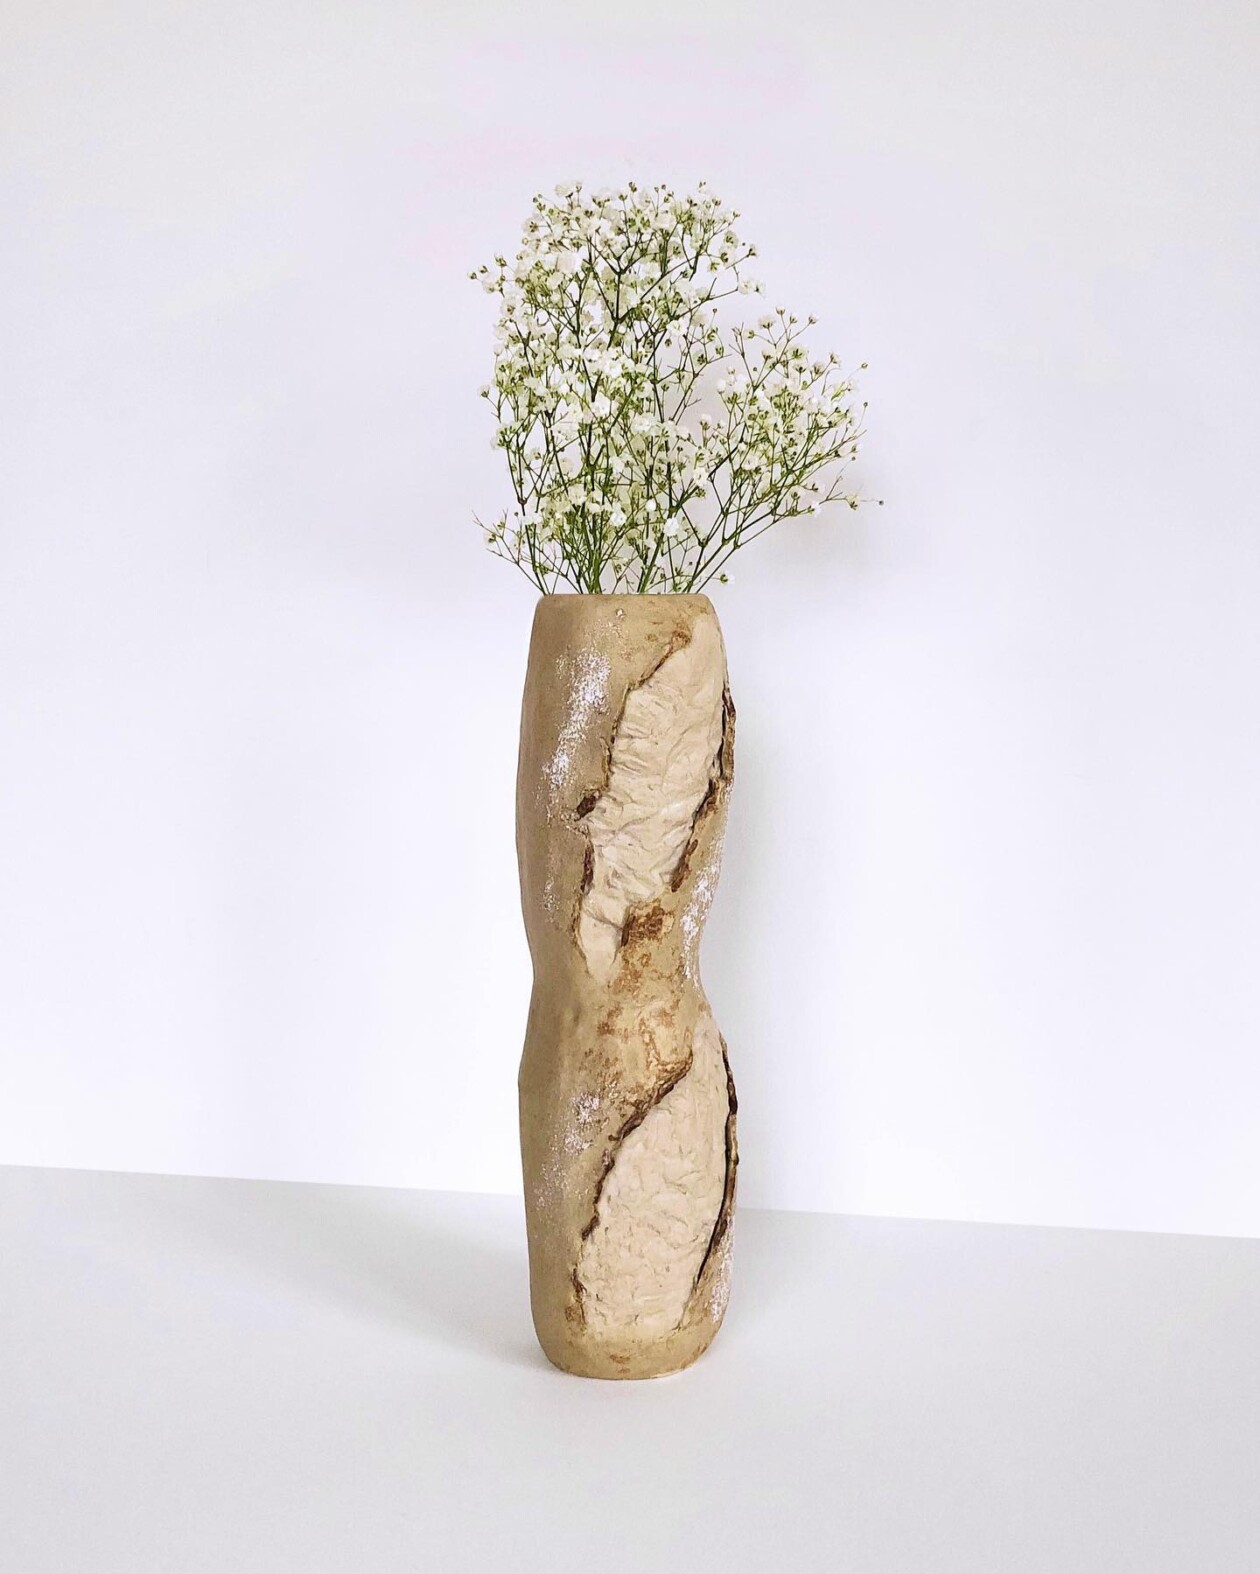 Food Based Ceramic Sculptures By Eléonore Joulin (6)